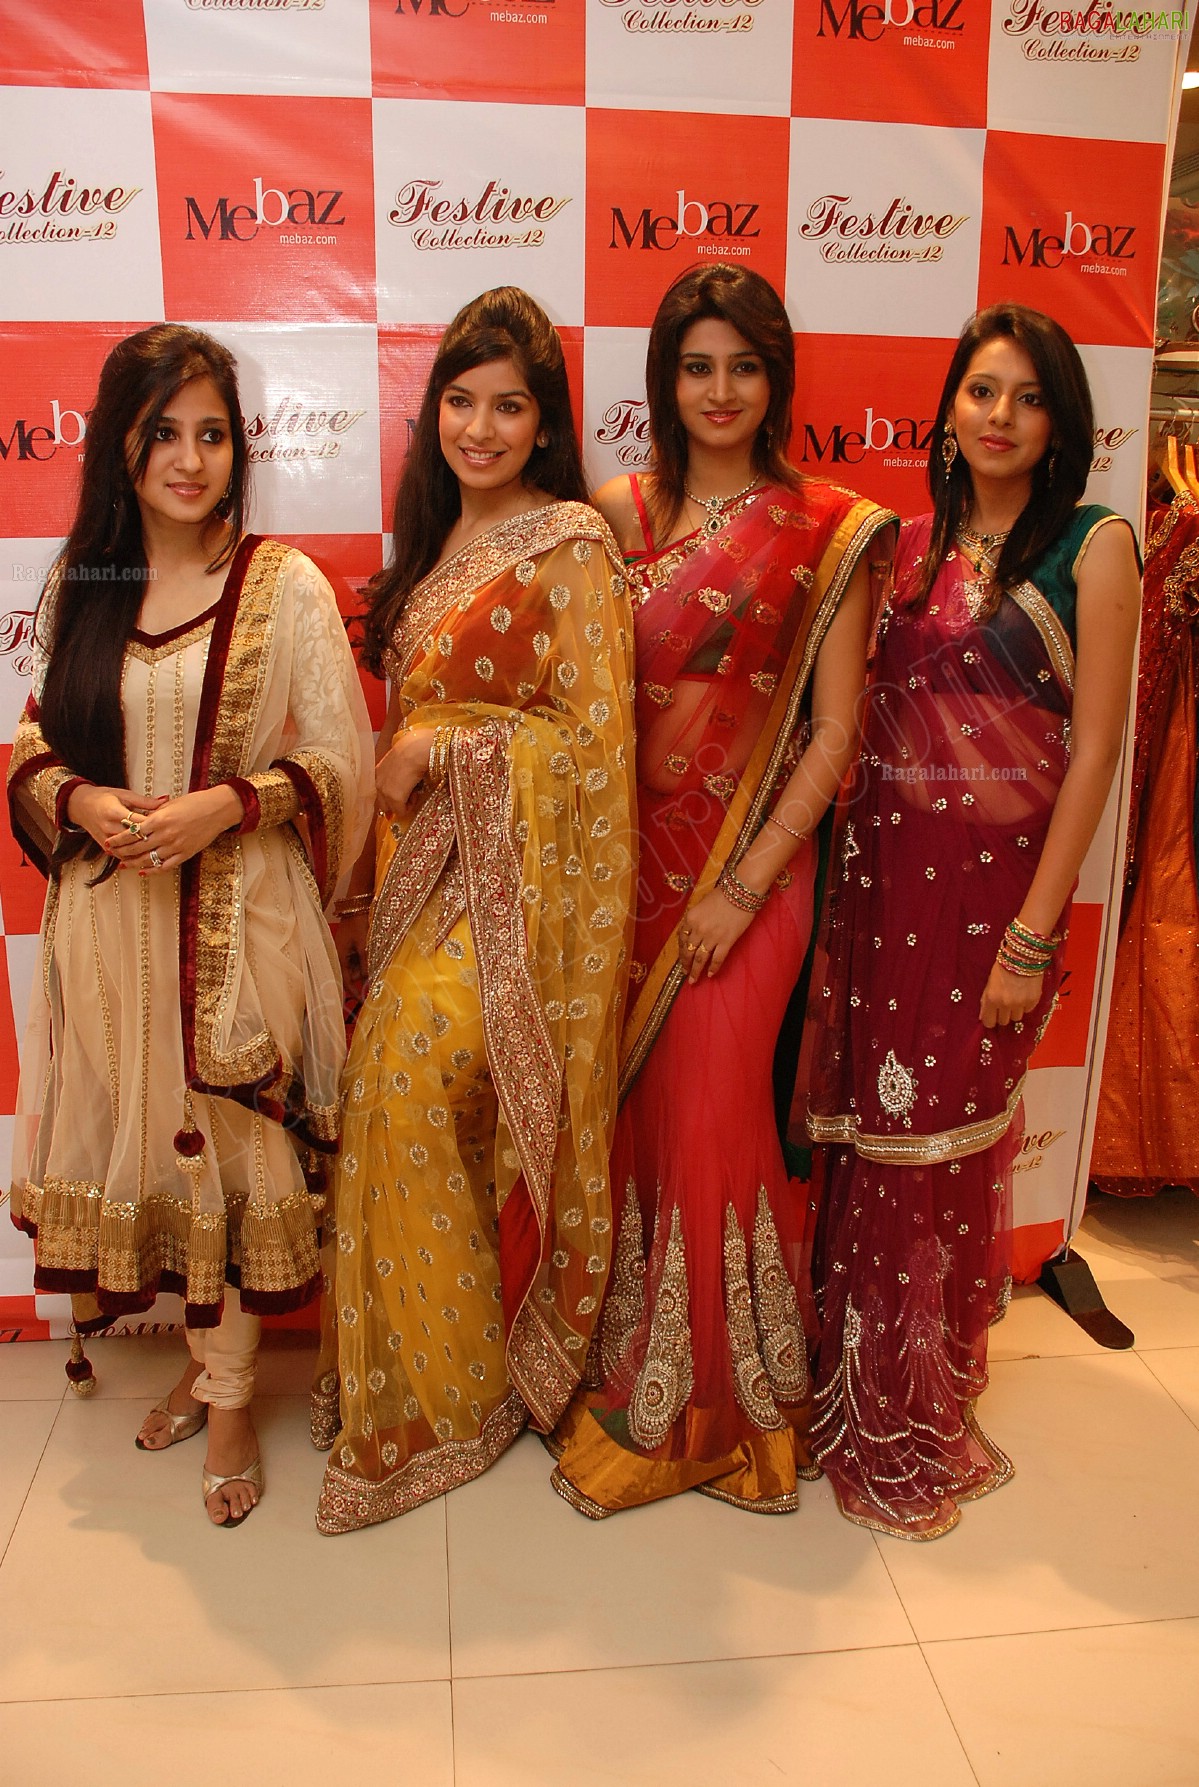 Launch of Festival & Designer Wedding Collection 2011 at Mebaz